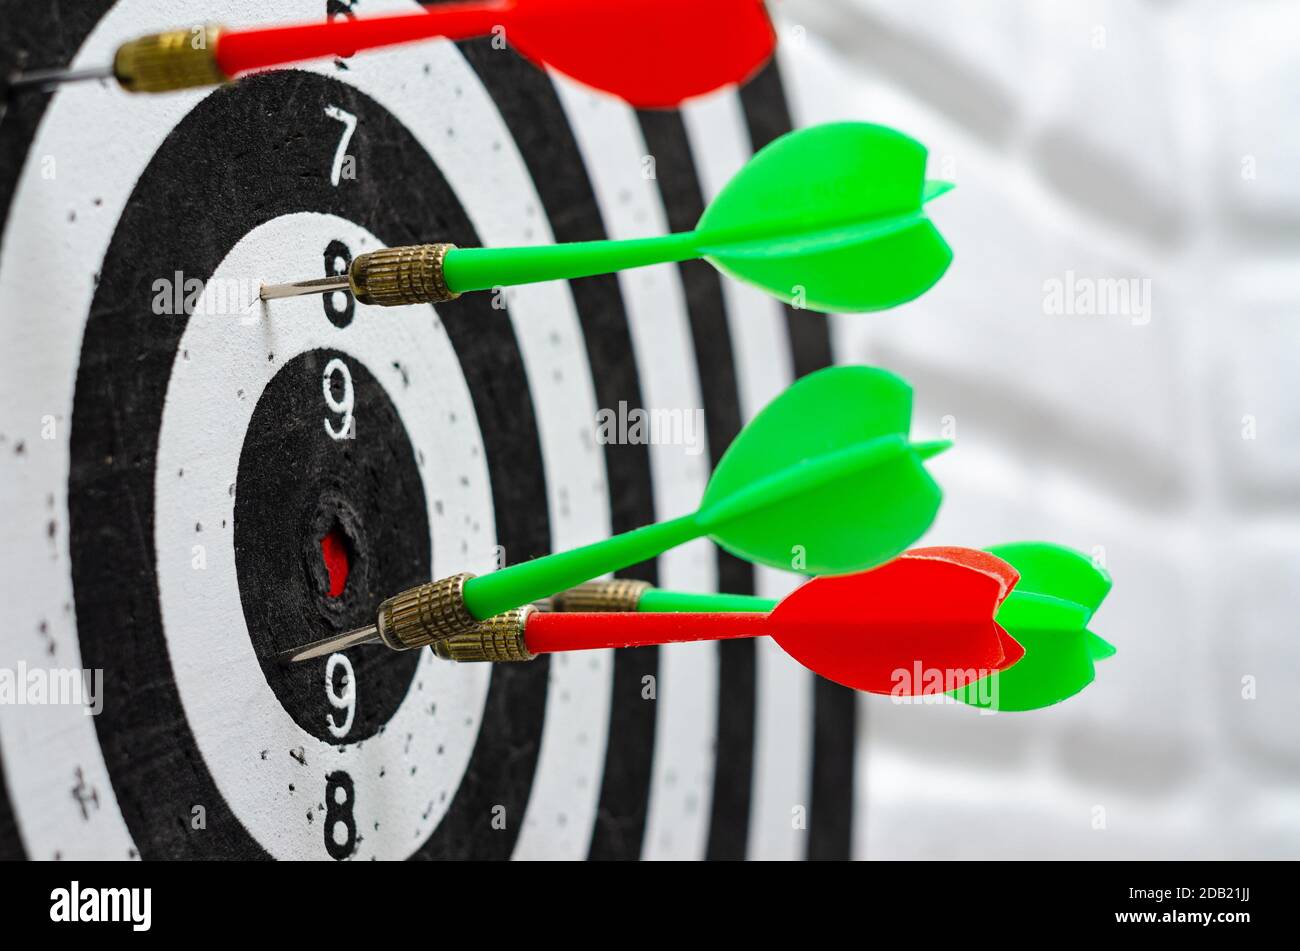 Darts stick out in round target in dartgame game Stock Photo - Alamy